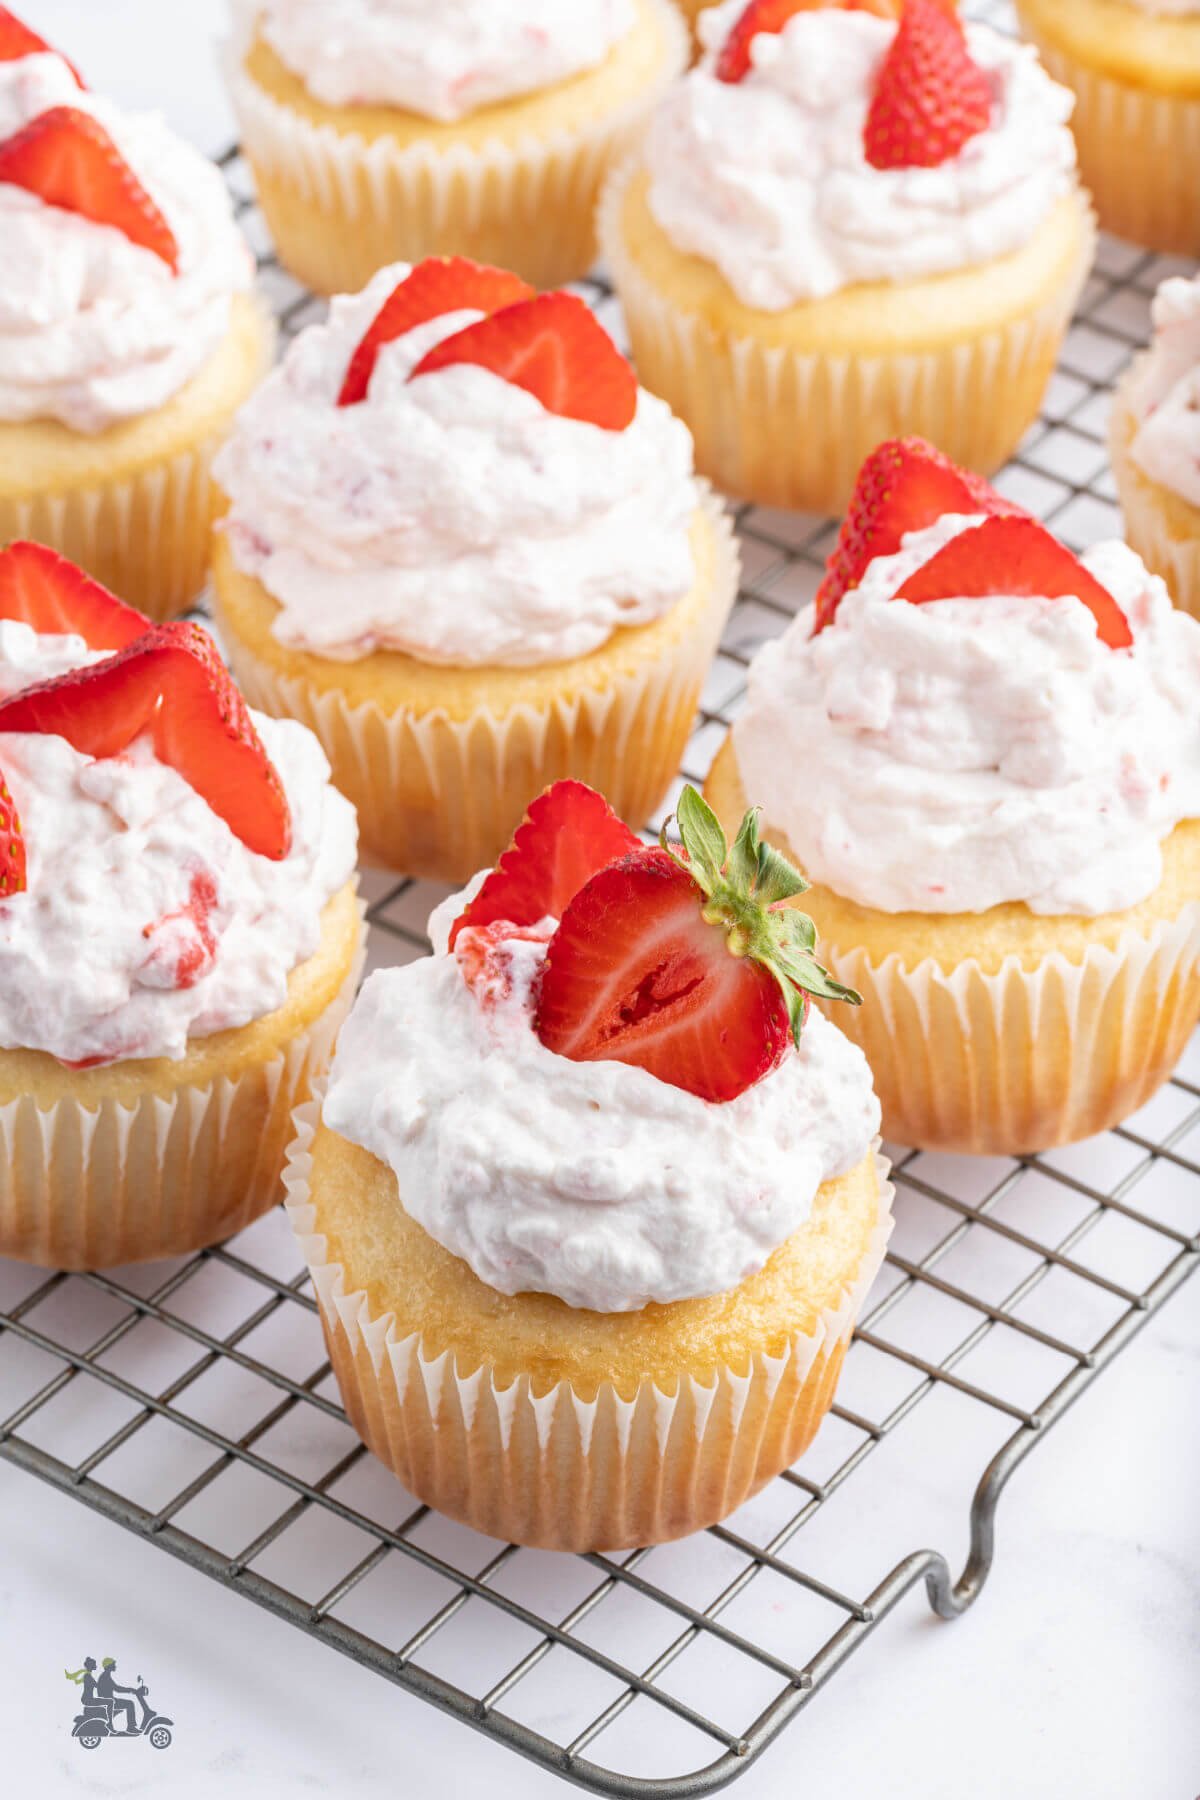 Strawberry cupcakes filled with strawberry filling and topped with whipped cream and sliced strawberries. 